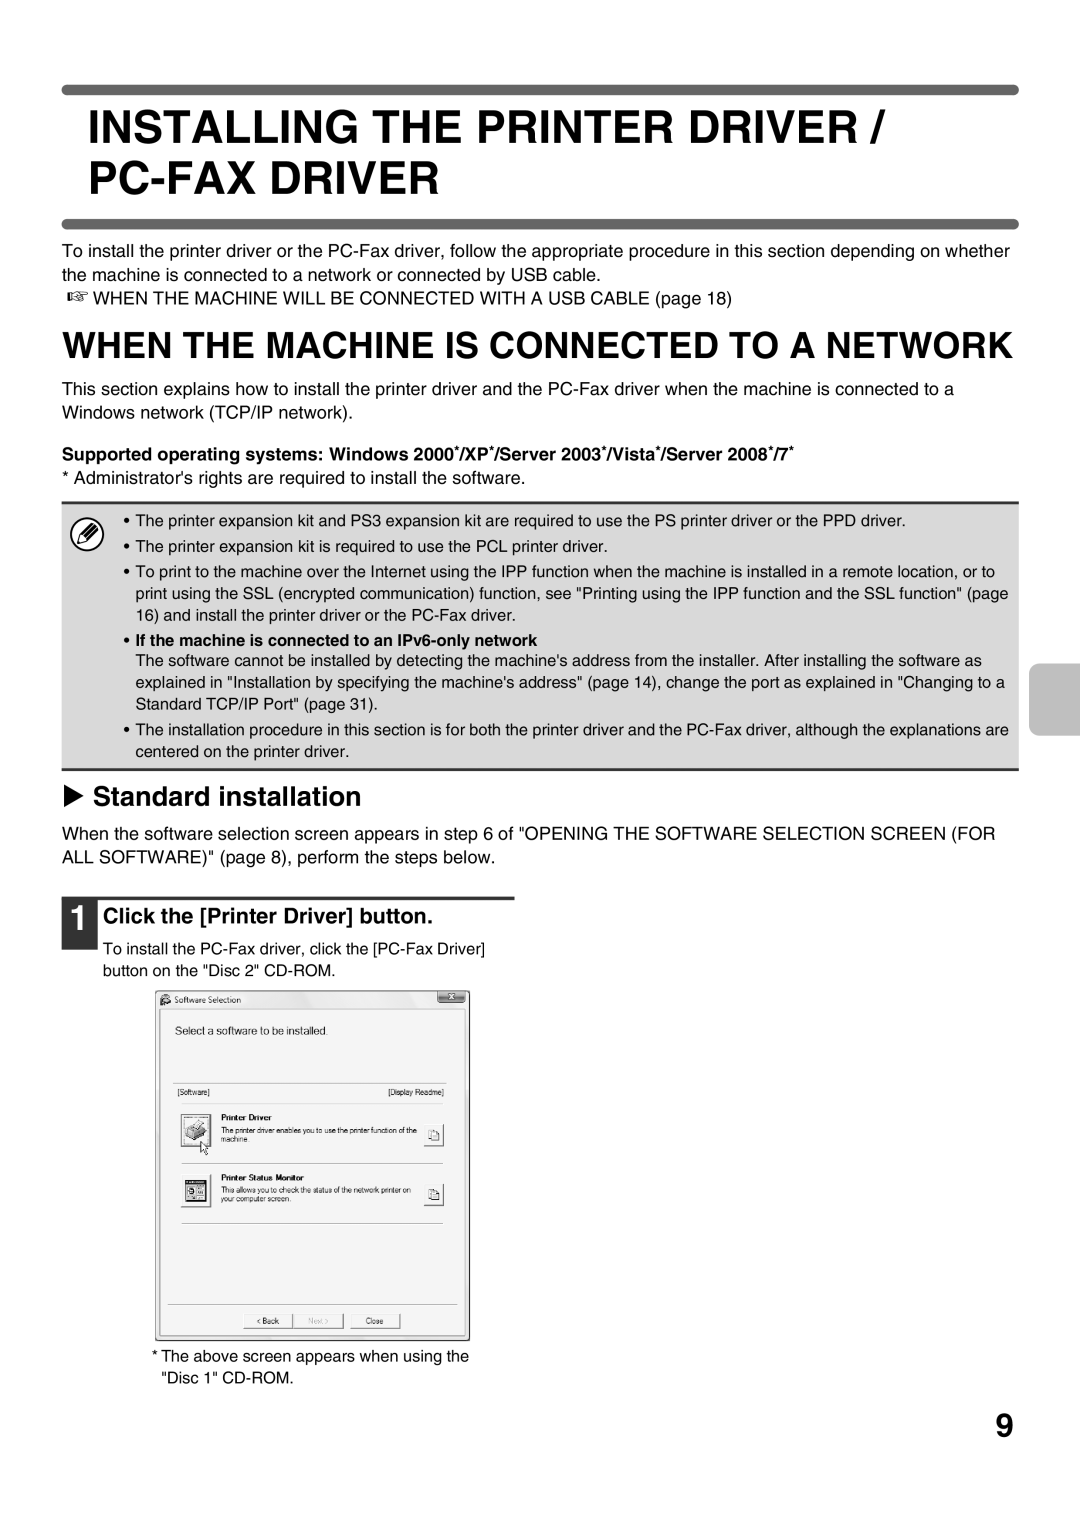 Sharp MX-2010U, MX-2310U Installing The Printer Driver / Pc-Fax Driver, When The Machine Is Connected To A Network 